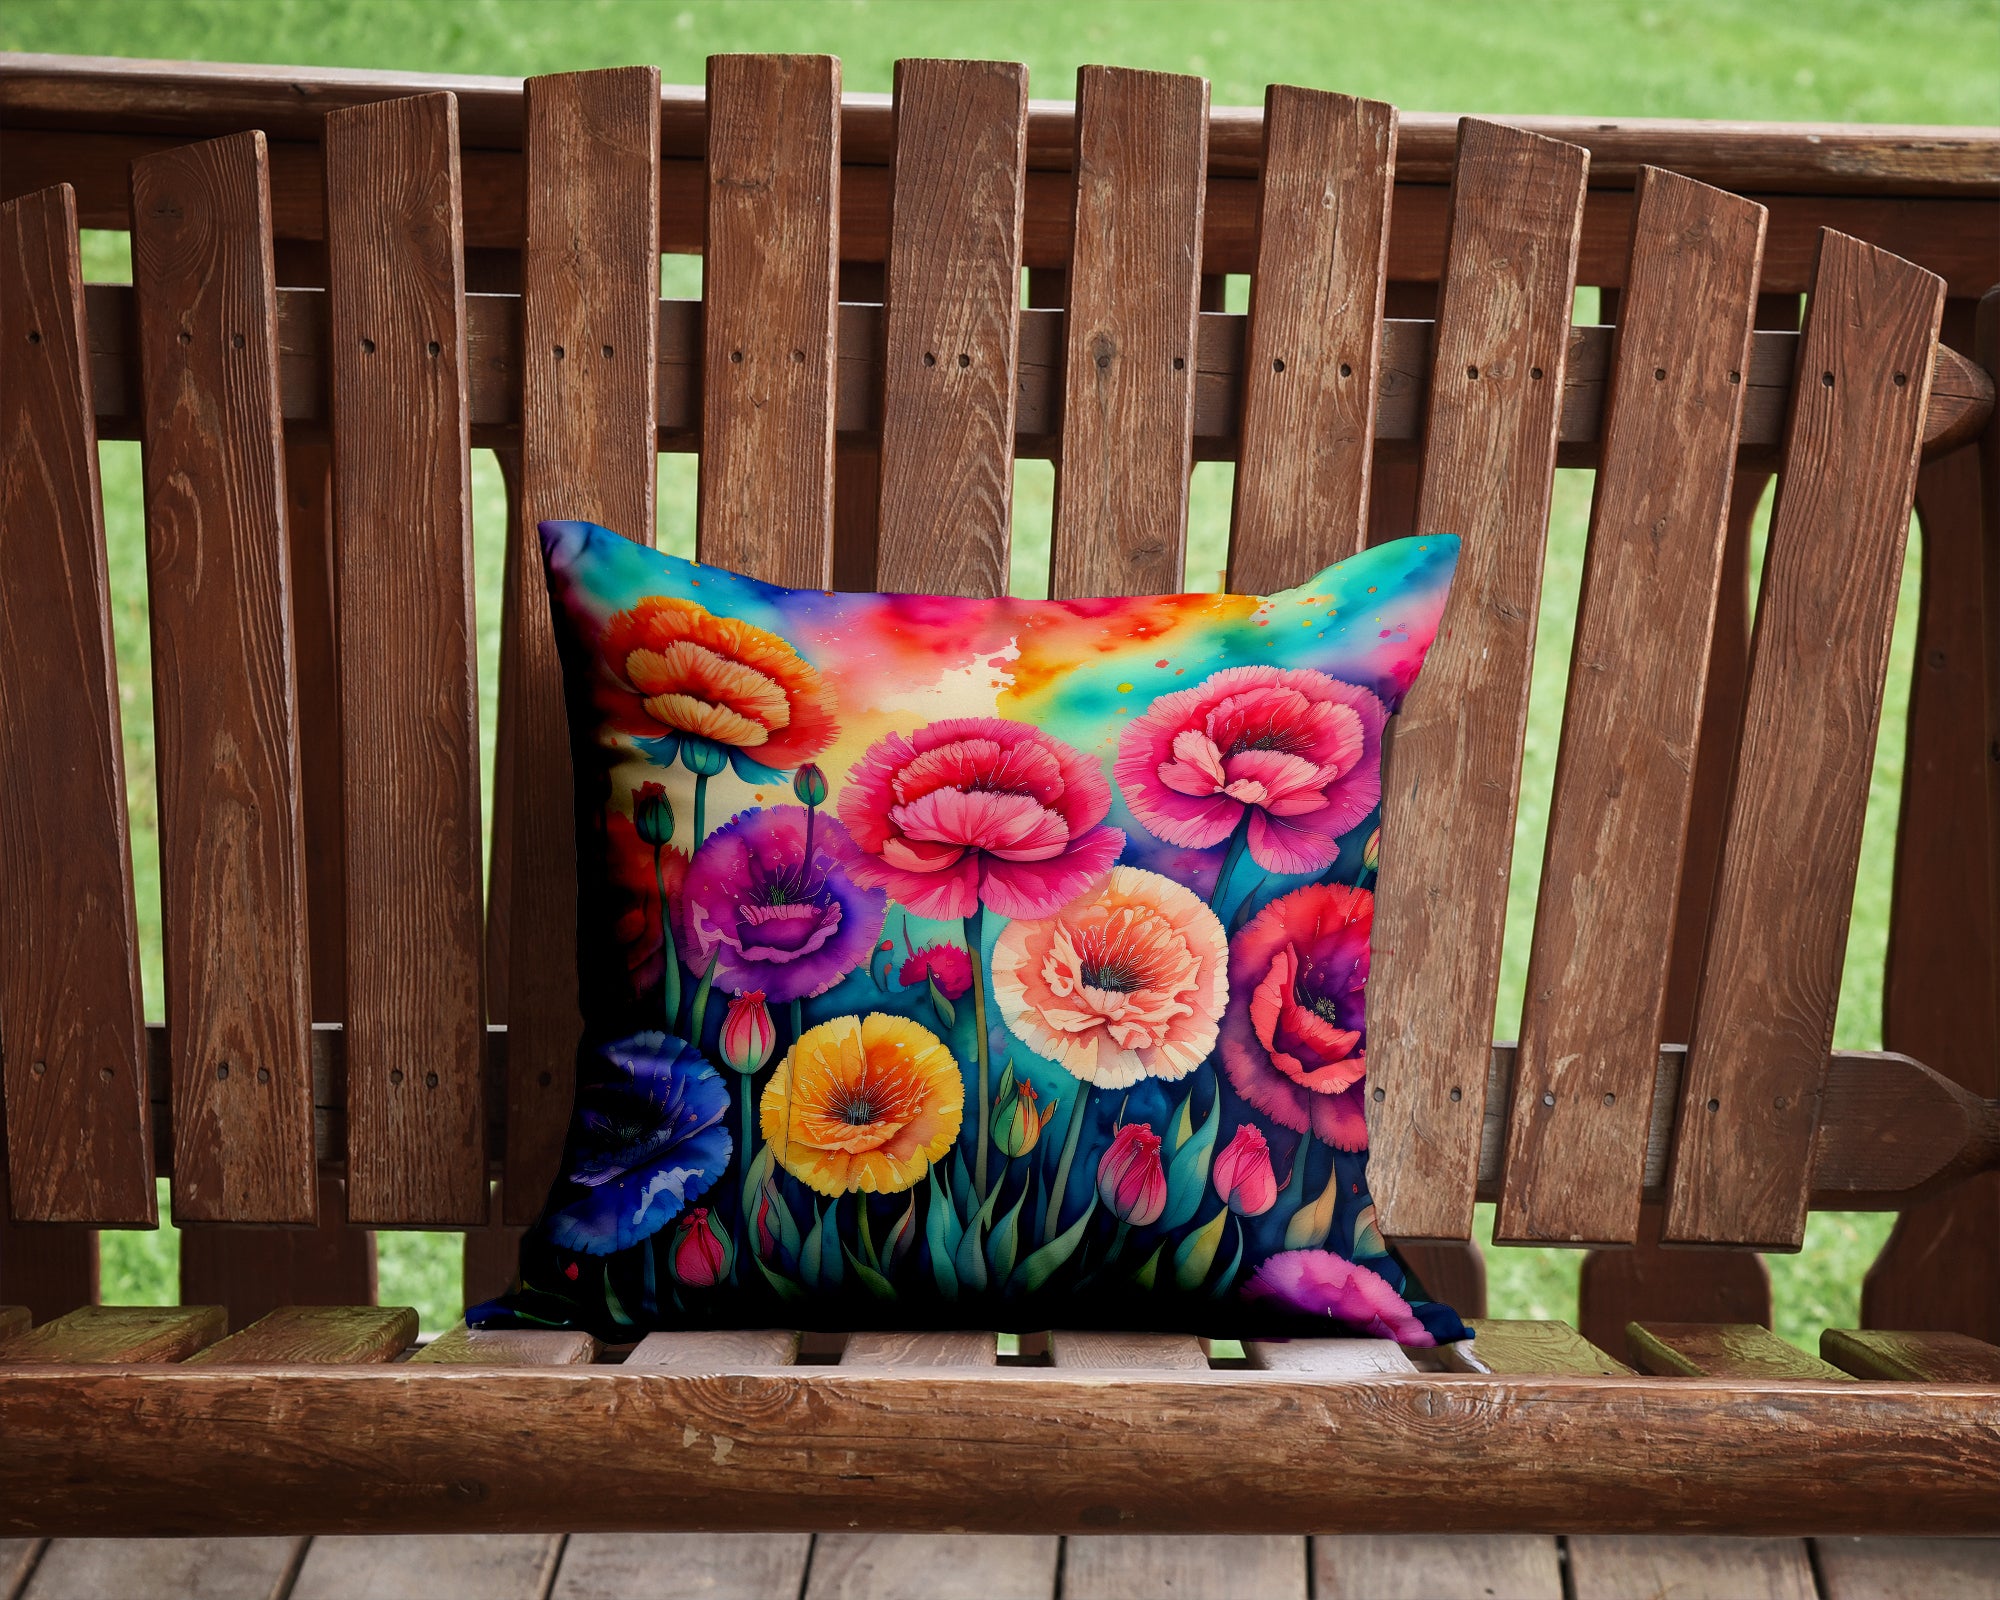 Buy this Colorful Carnations Fabric Decorative Pillow